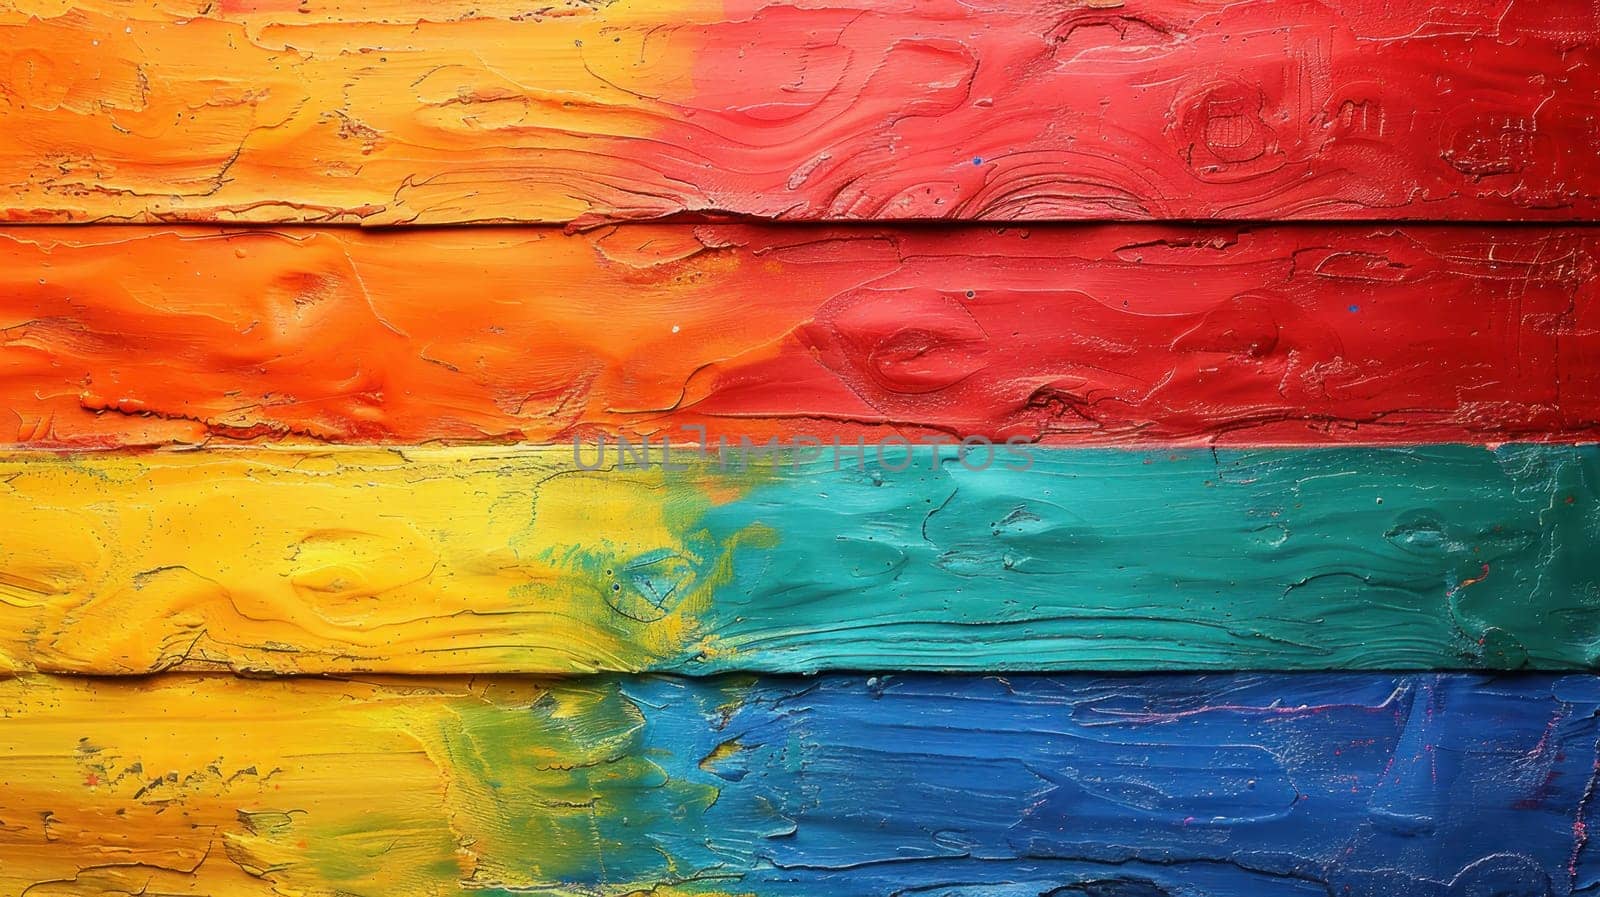 A colorful painting of wood with a rainbow of colors. The painting is abstract and has a vibrant, lively feel to it